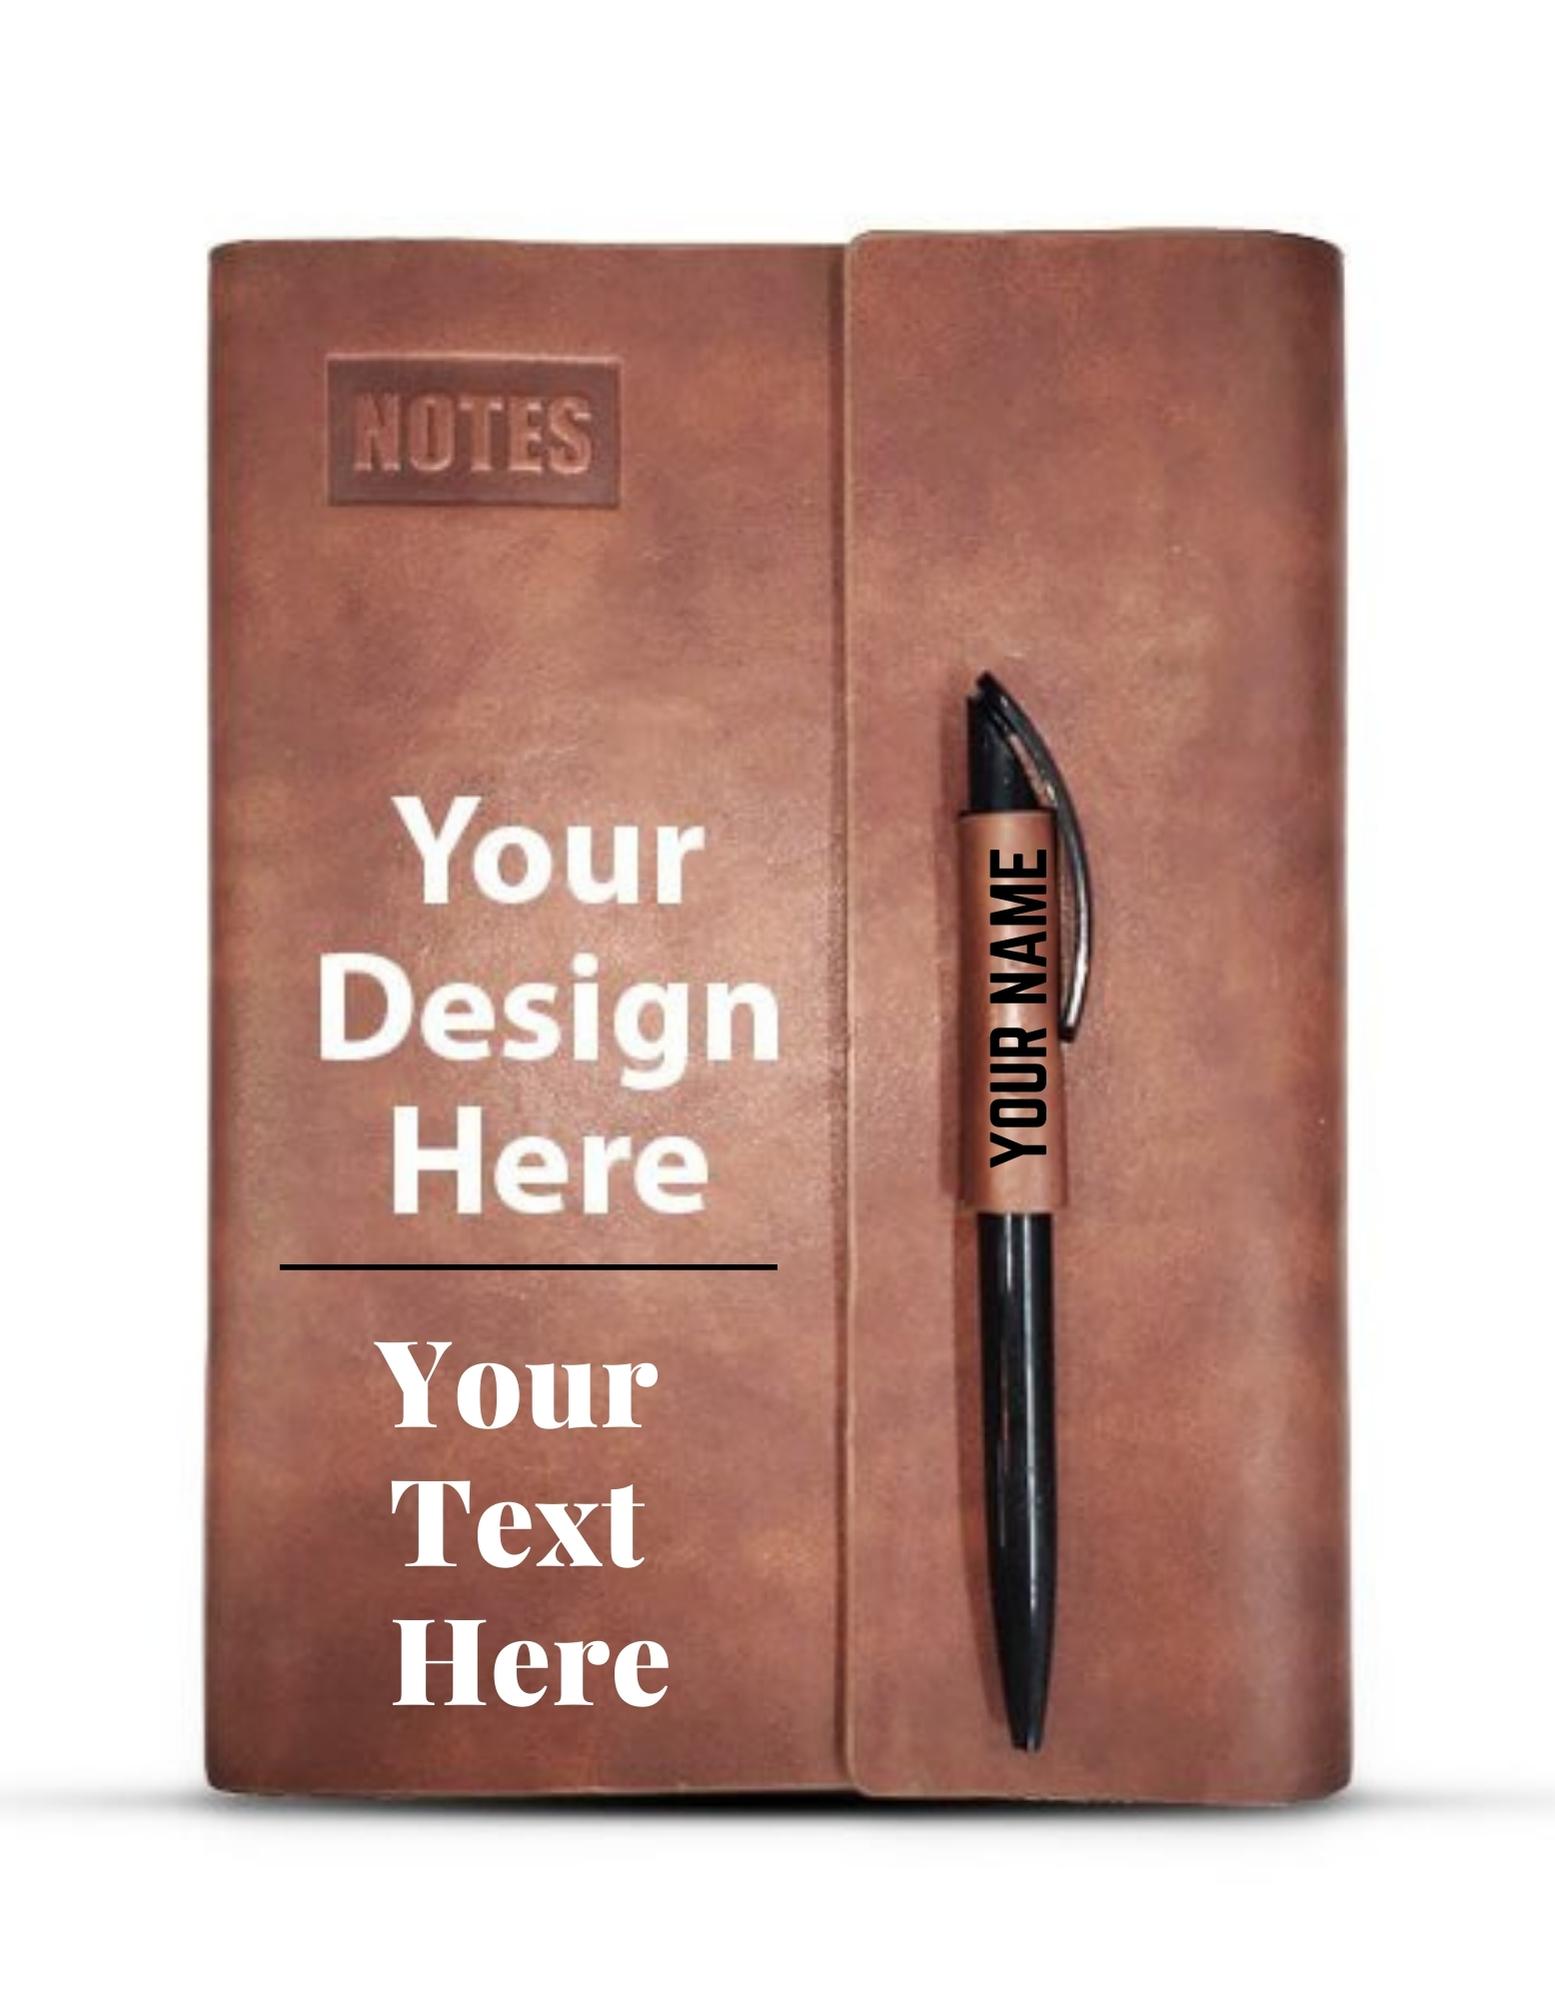 Custmized Diary and pens